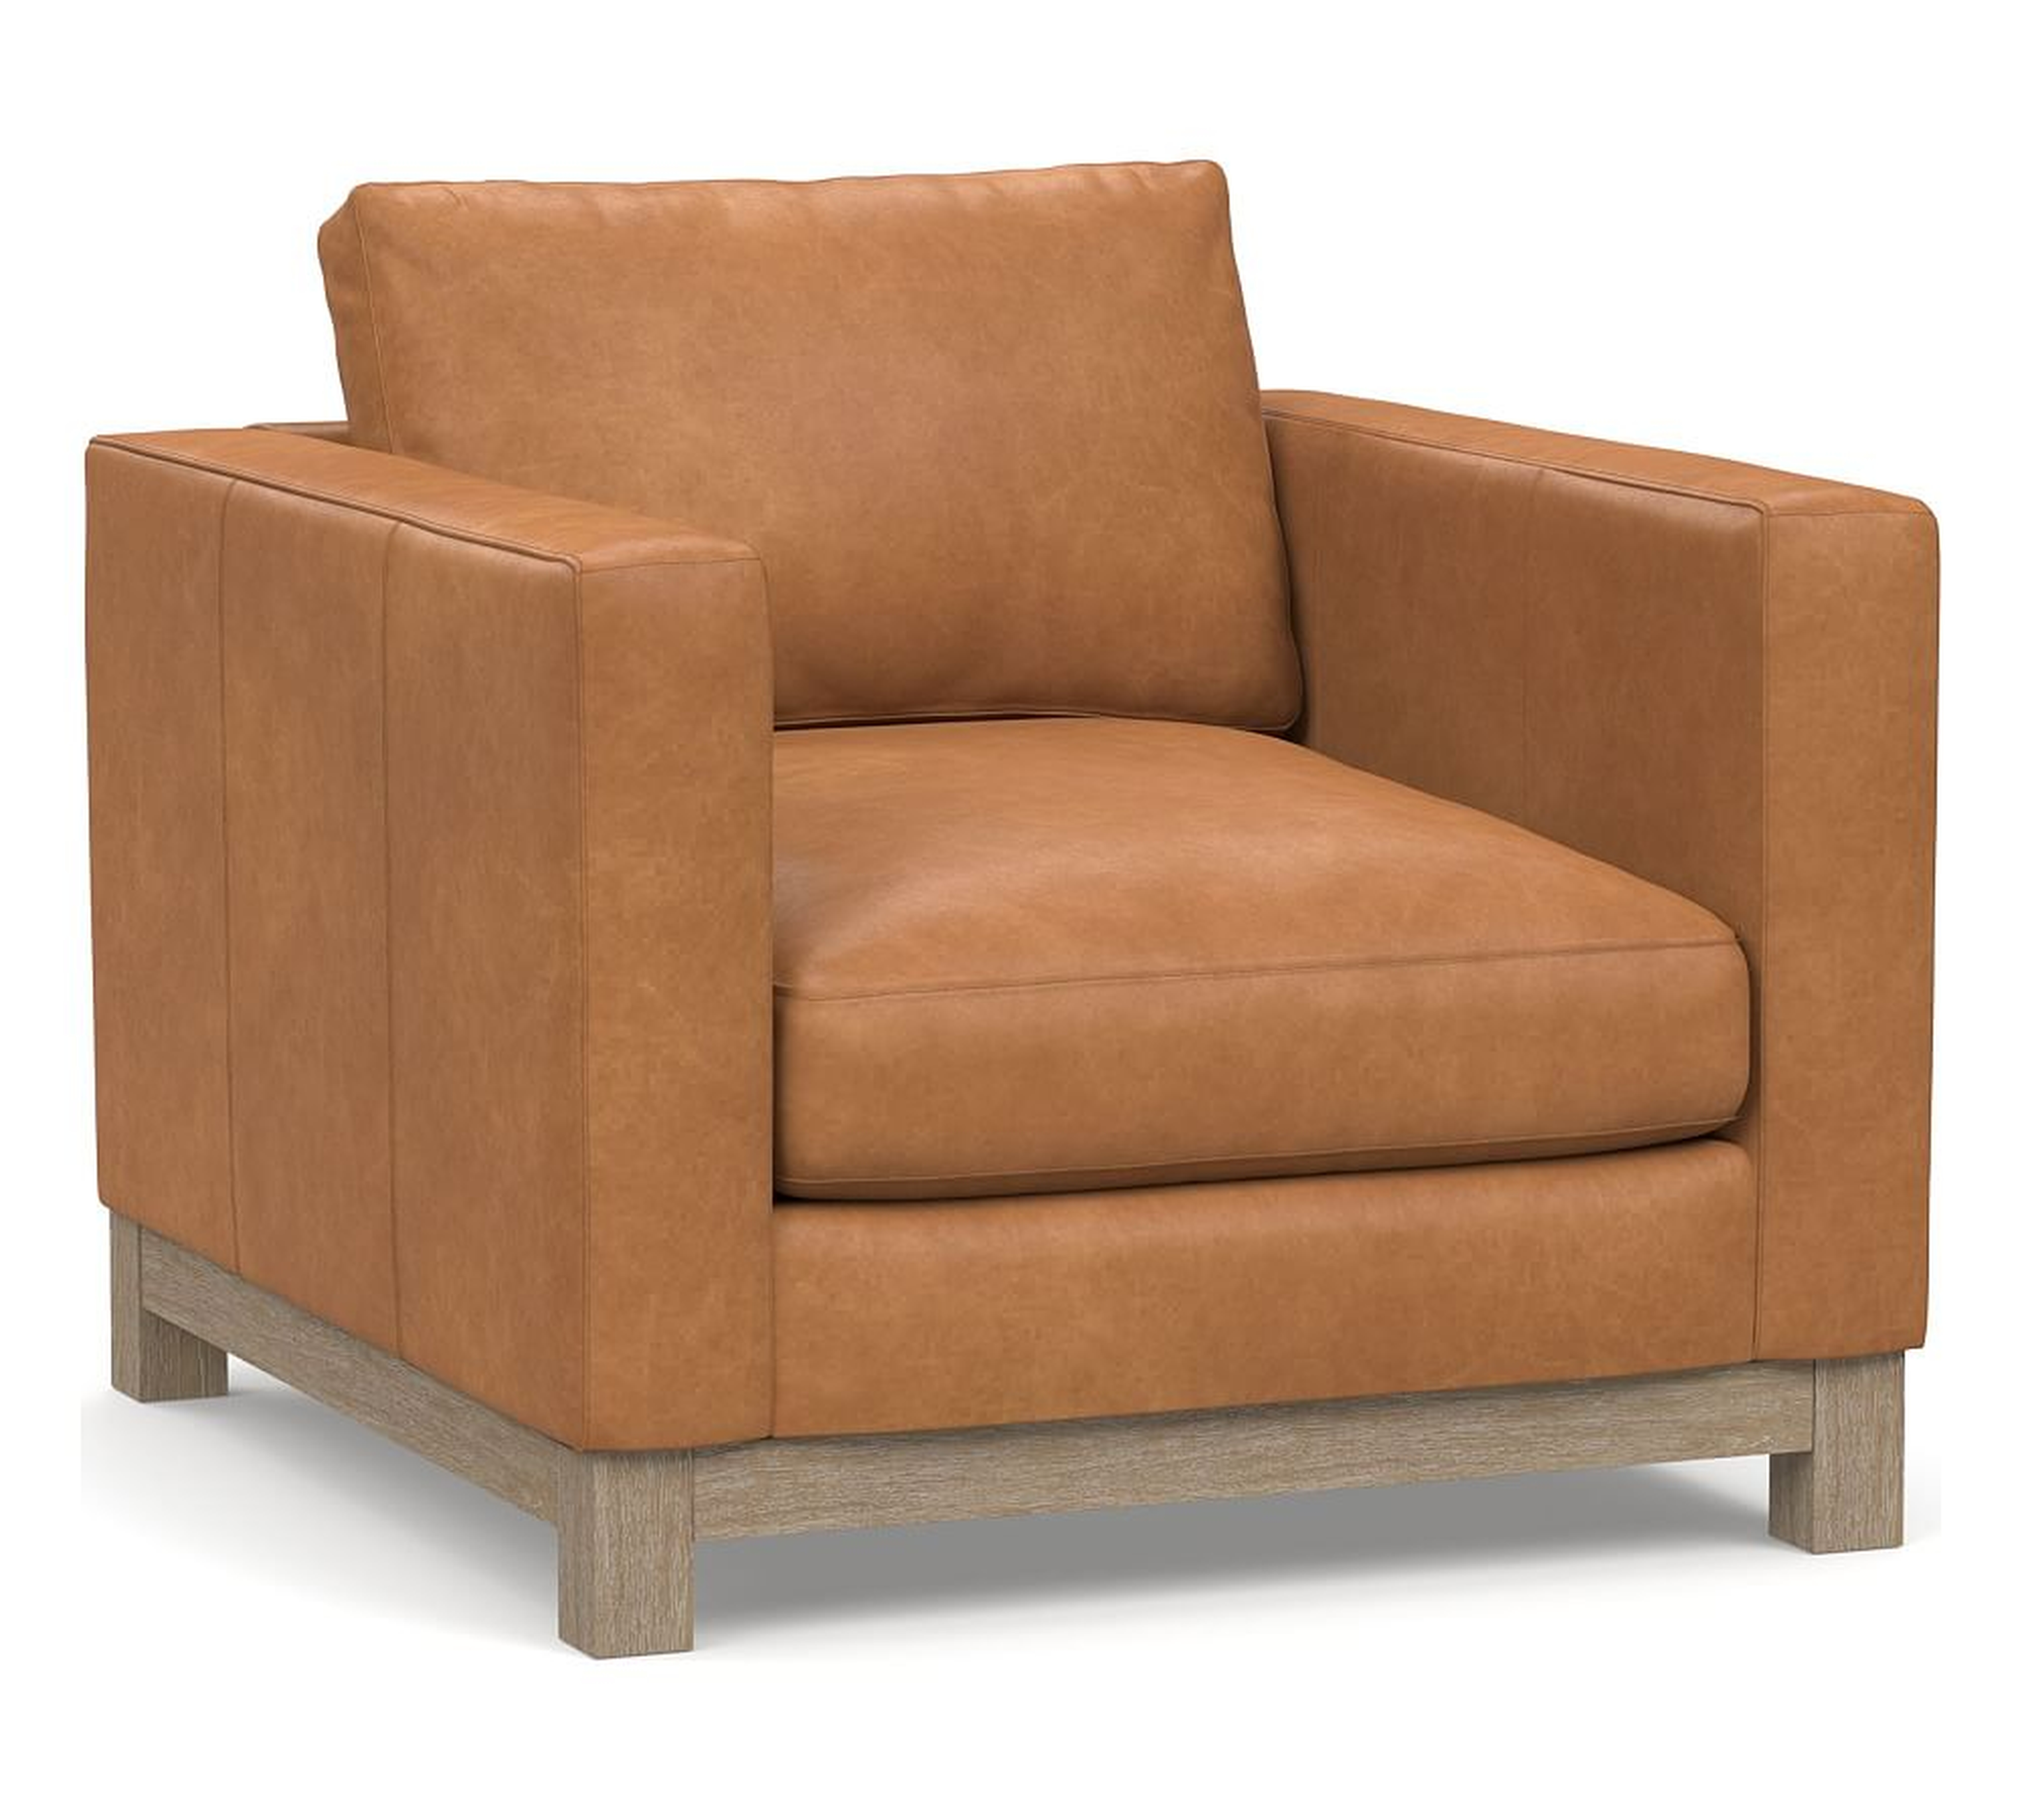 Jake Leather Armchair with Wood Legs, Down Blend Wrapped Cushions Churchfield Camel - Pottery Barn